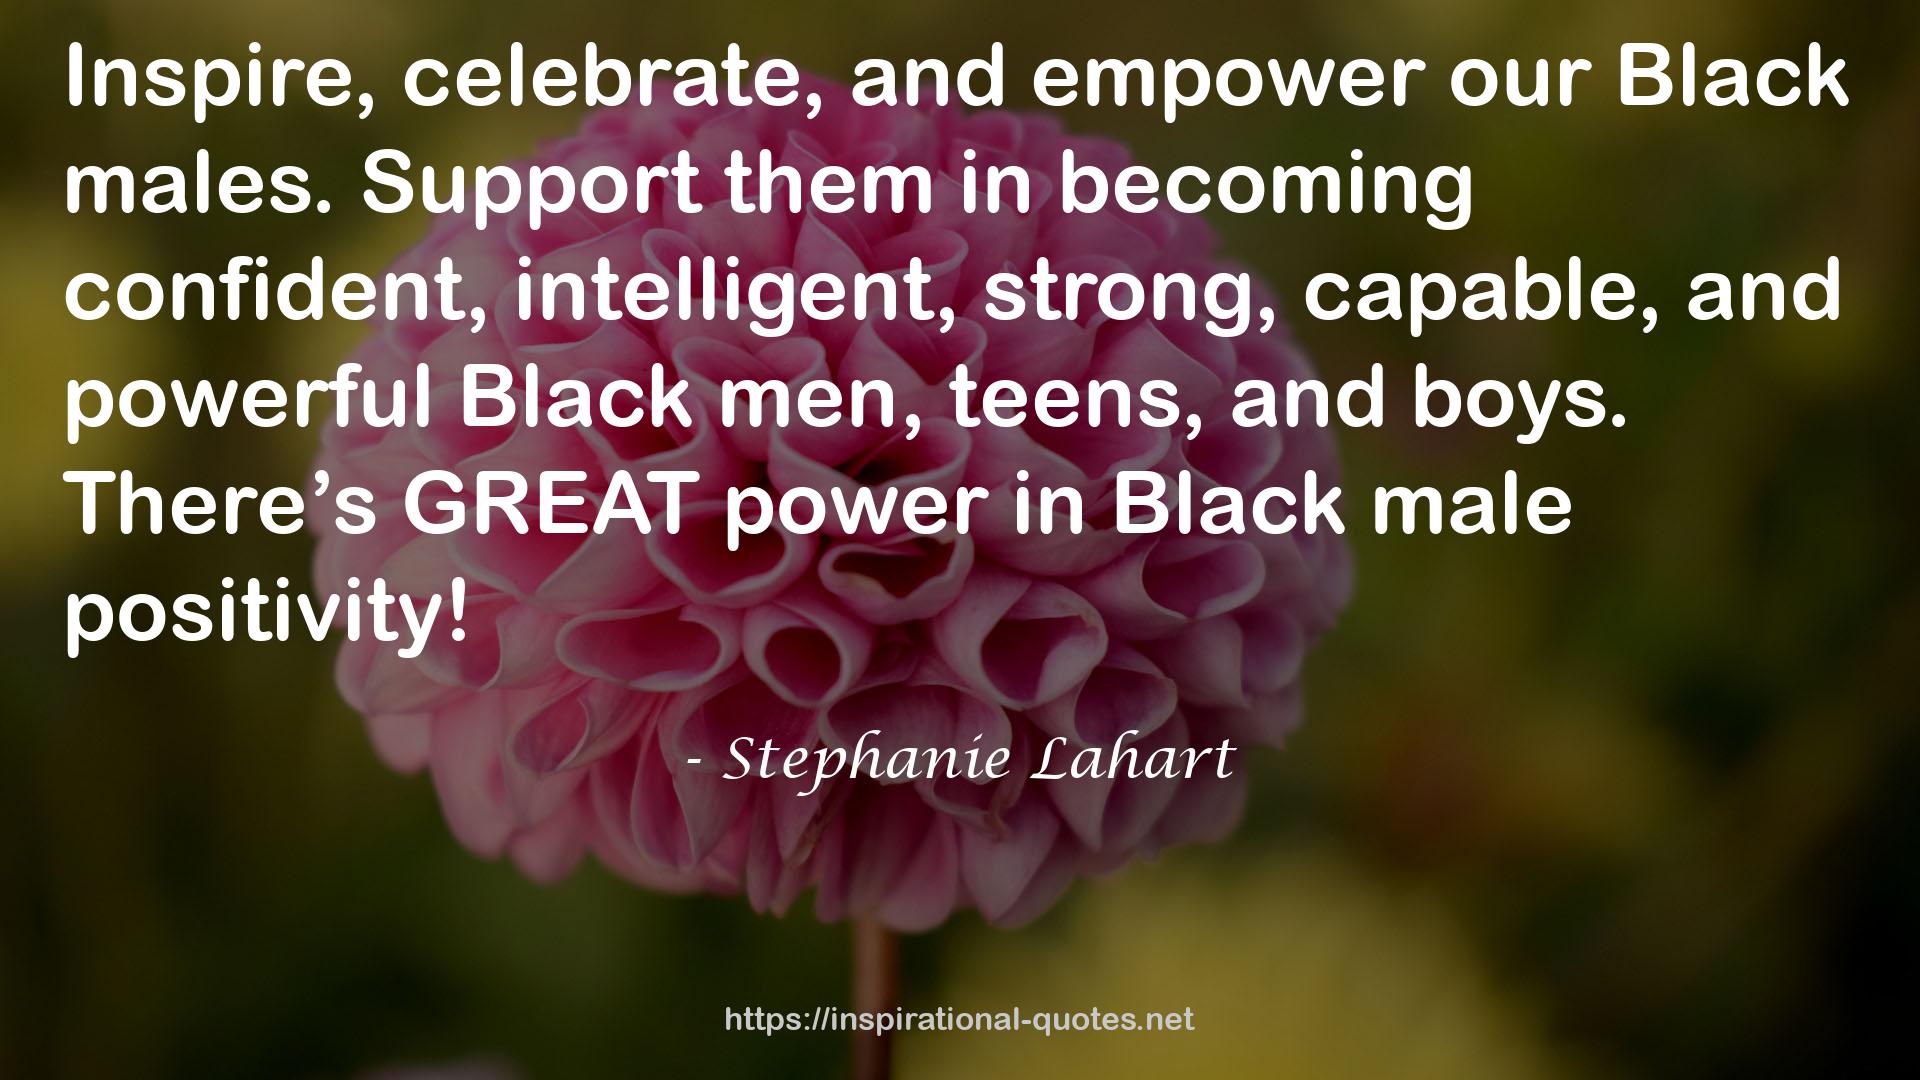 Stephanie Lahart quote : Inspire, celebrate, and empower our Black males. Support them in becoming confident, intelligent, strong, capable, and powerful Black men, teens, and boys. There’s GREAT power in Black male positivity!